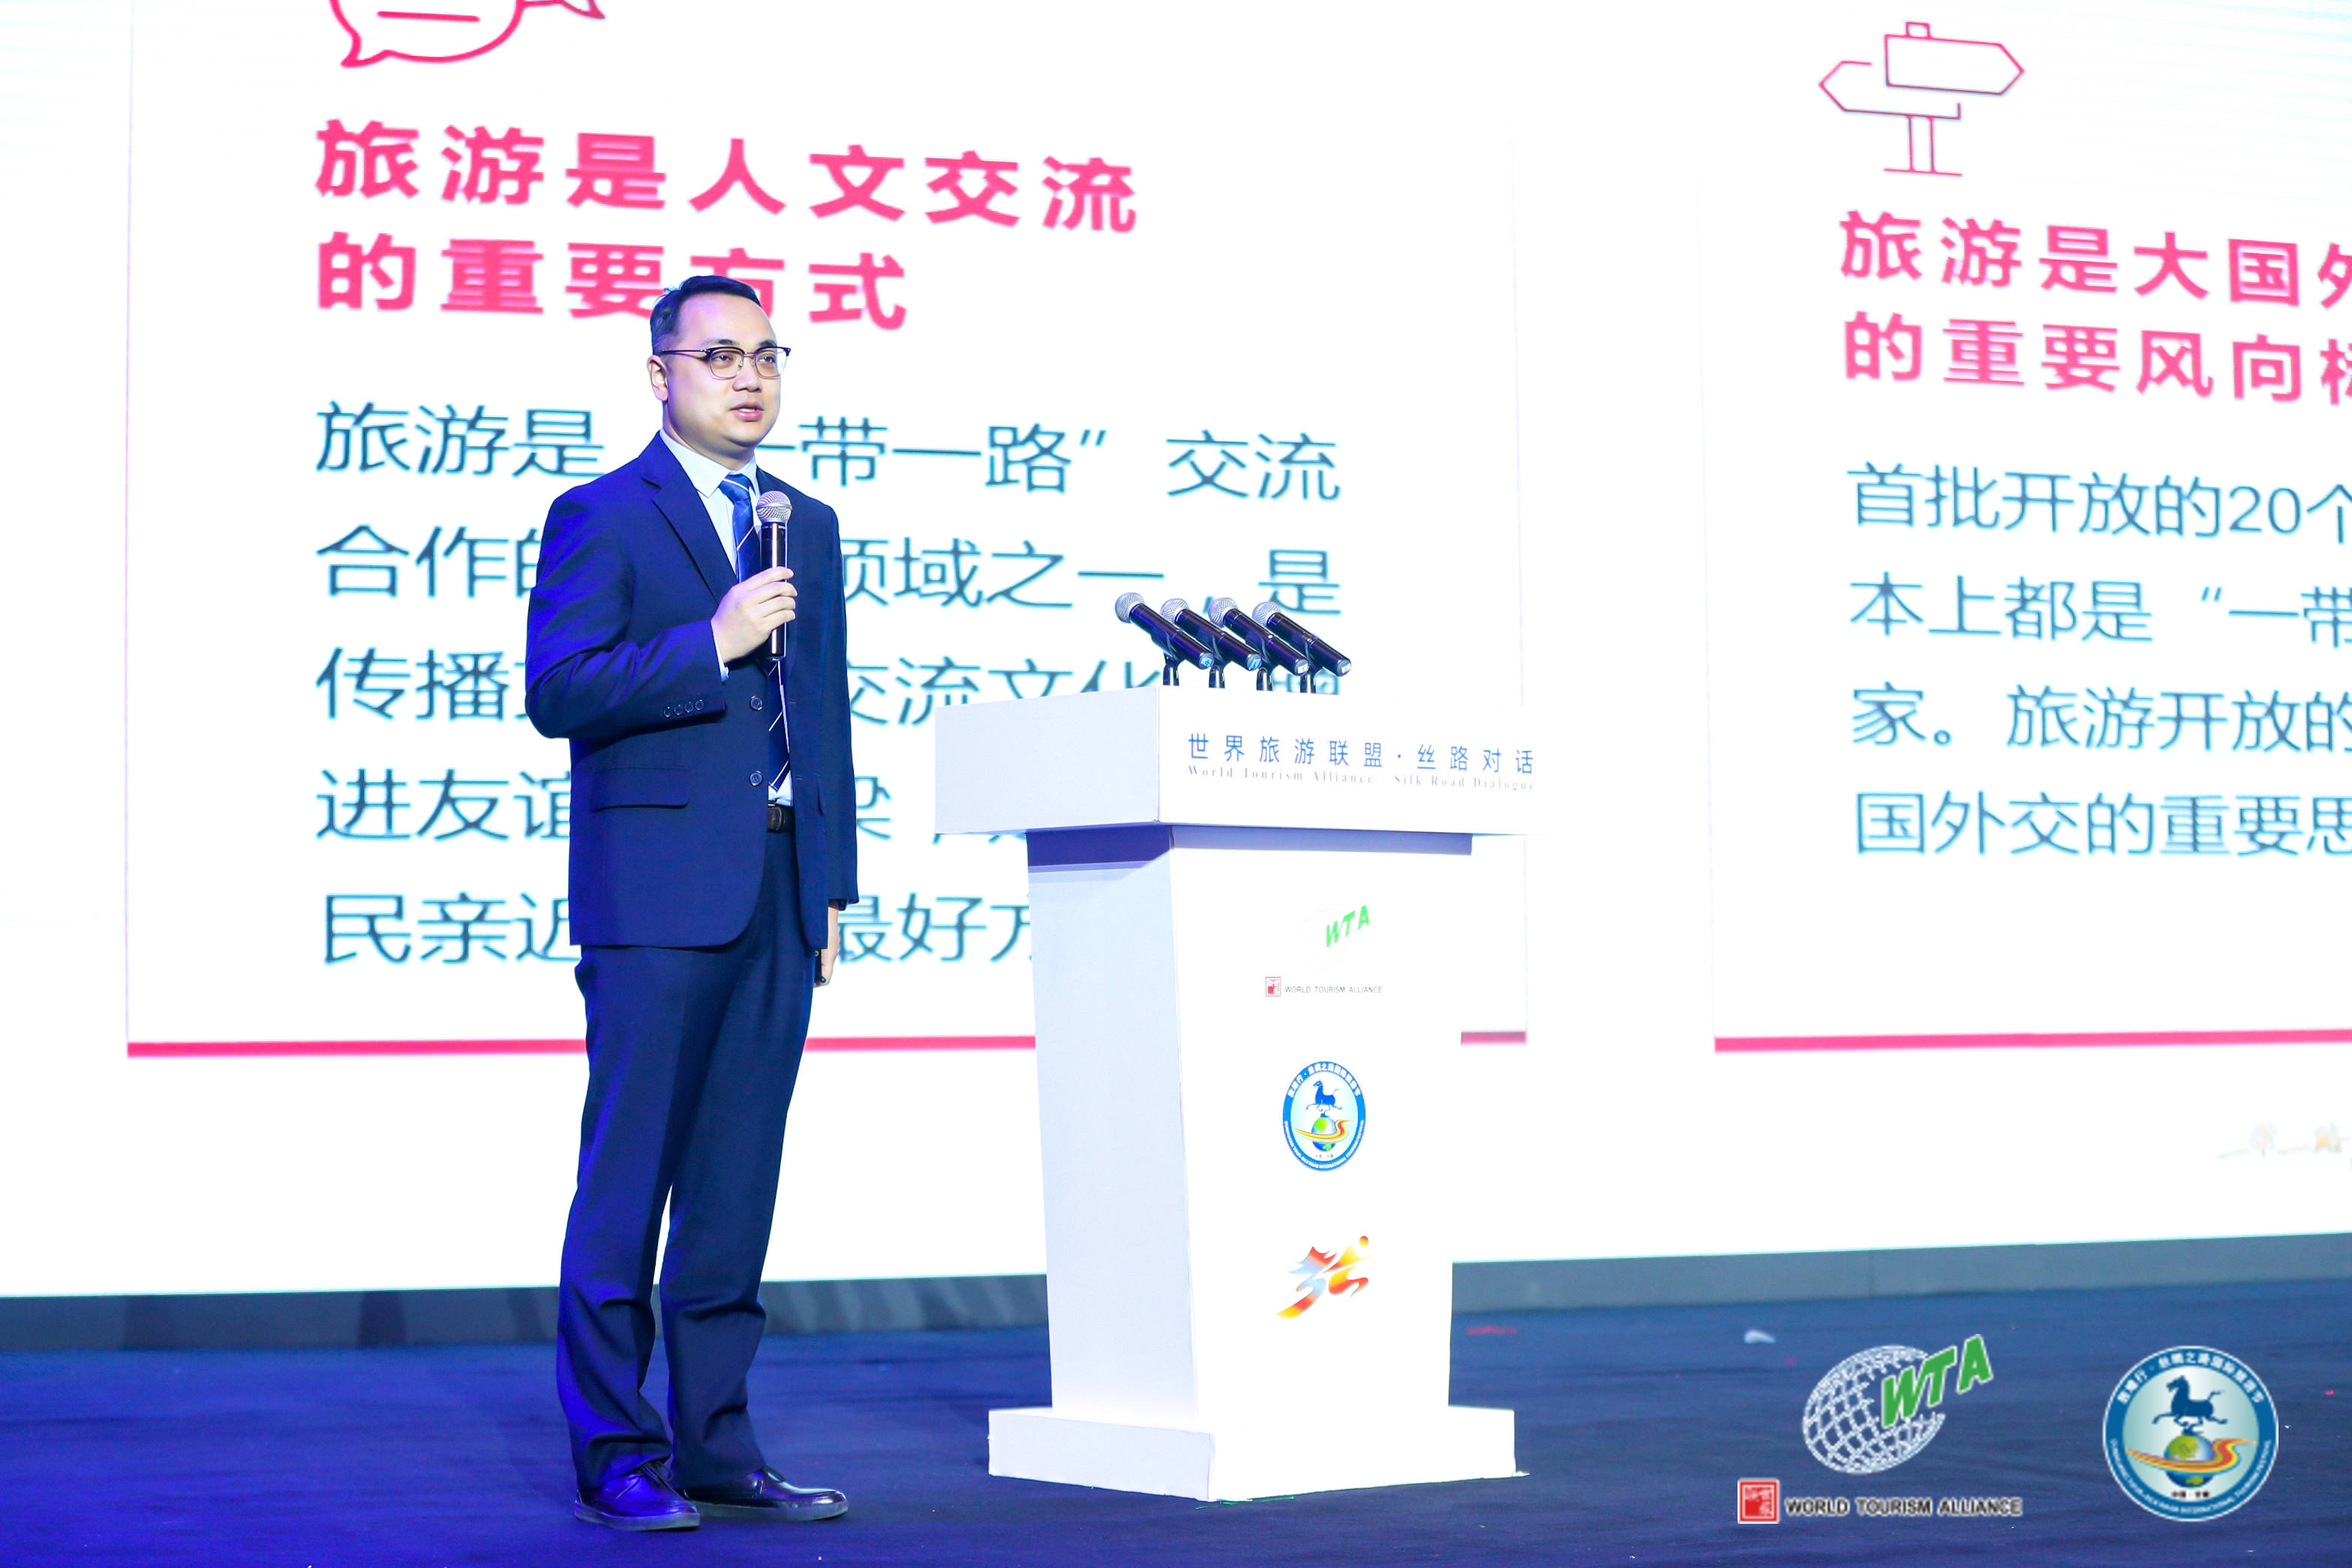 Deng Ning, Ph.D., Professor and Deputy Dean of School of Tourism Sciences, Beijing International Studies University (BISU), The Executive Director of a Research Center for Digital Culture and Tourism Research in BISU